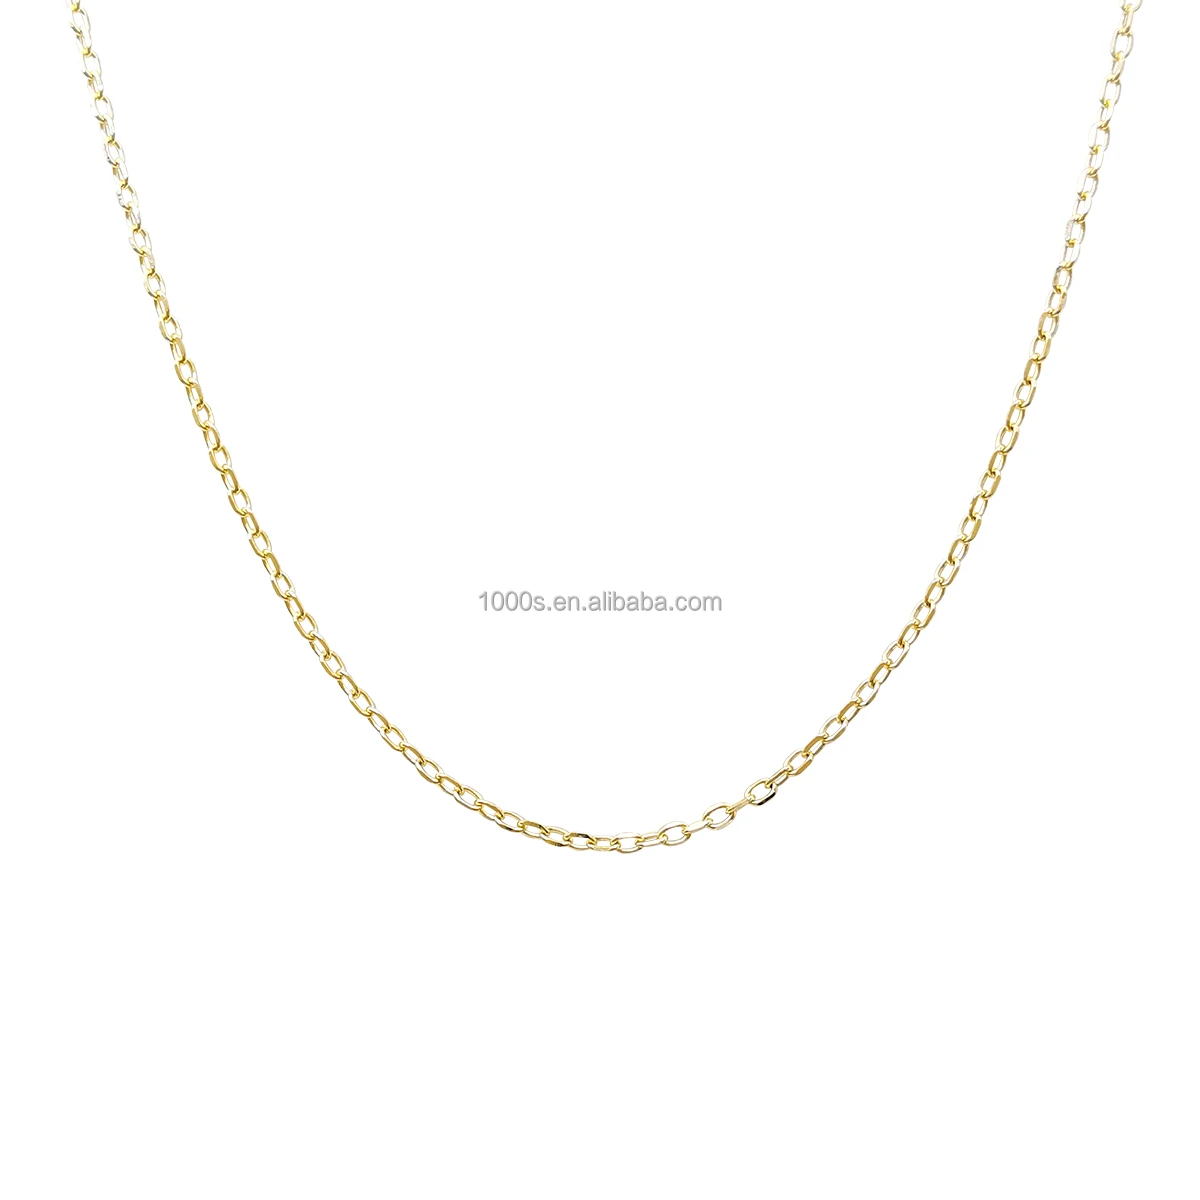 

Wholesale New Arrivals Simple Design 14K Yellow Gold Cross Cable Chain Necklace Gold Chain Jewelry for Women Men Gift